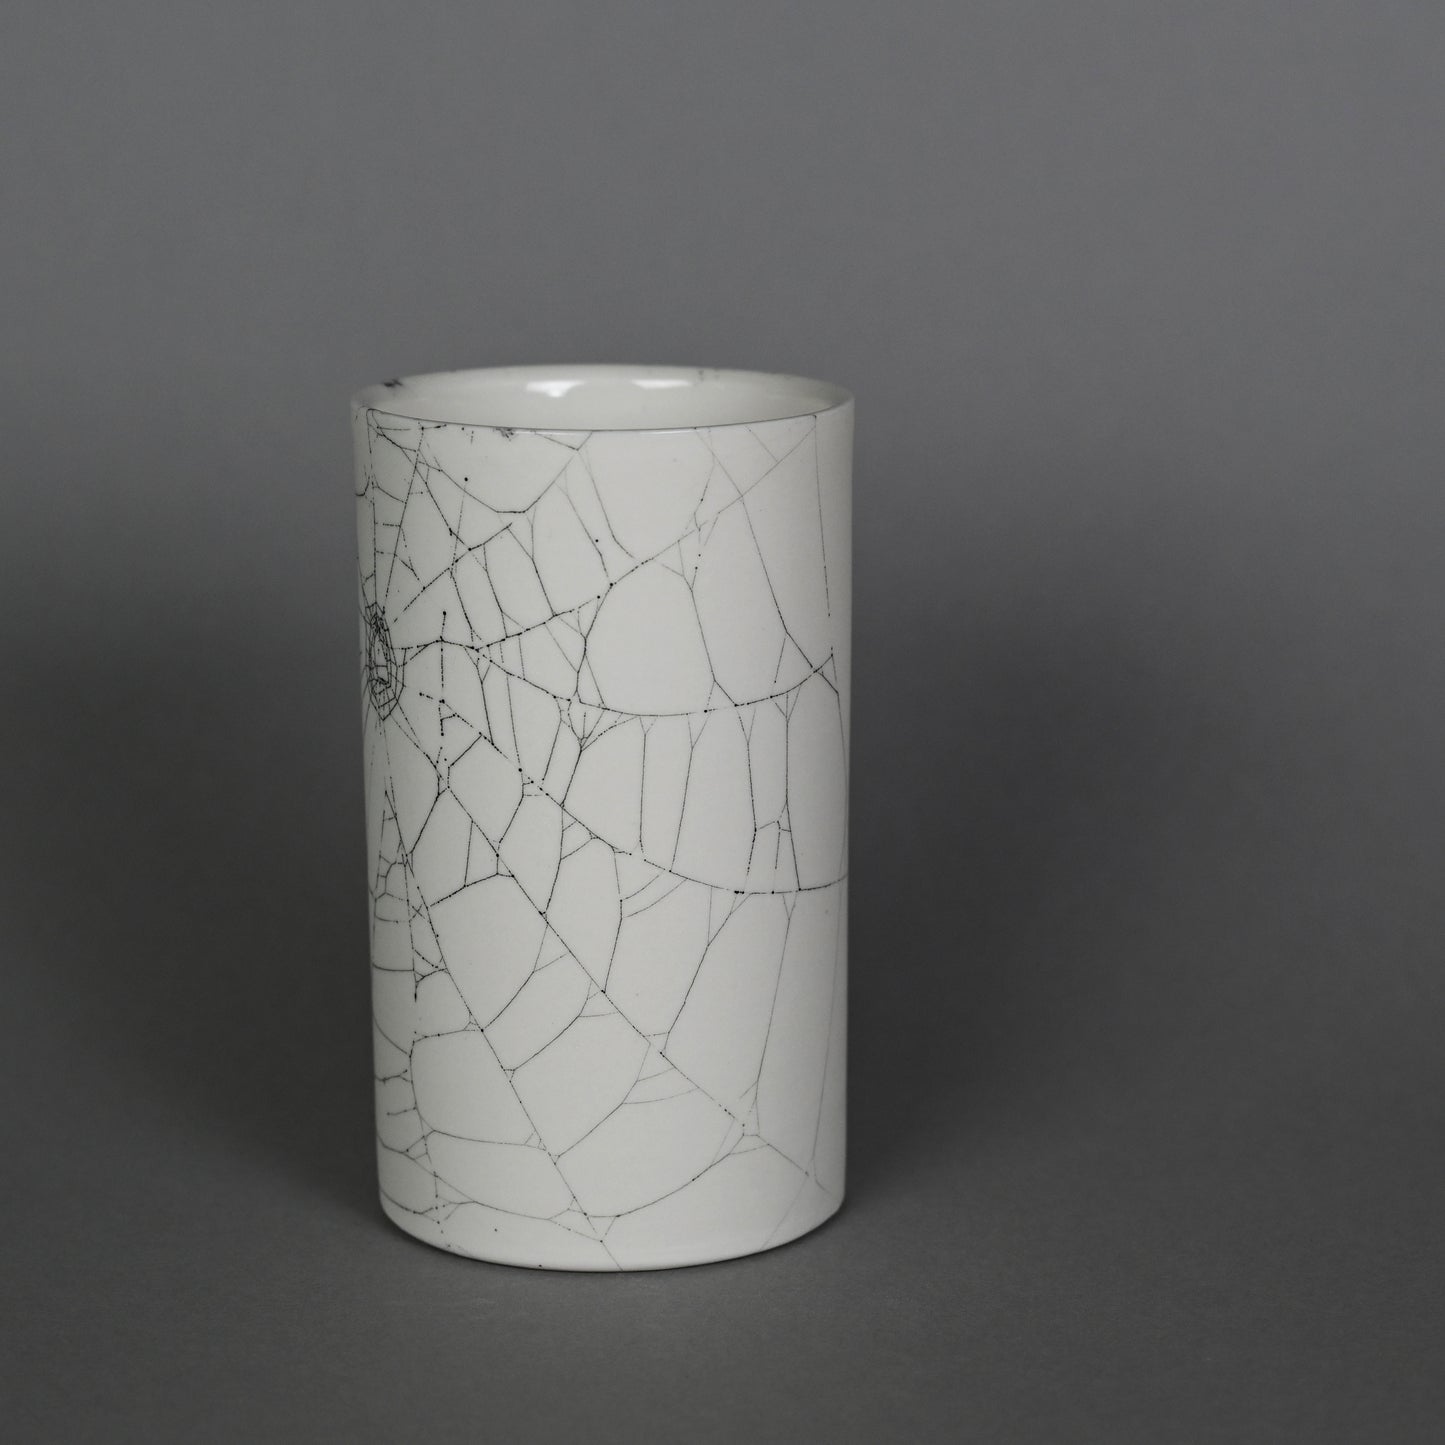 Web on Clay (199), Collected September 19, 2022